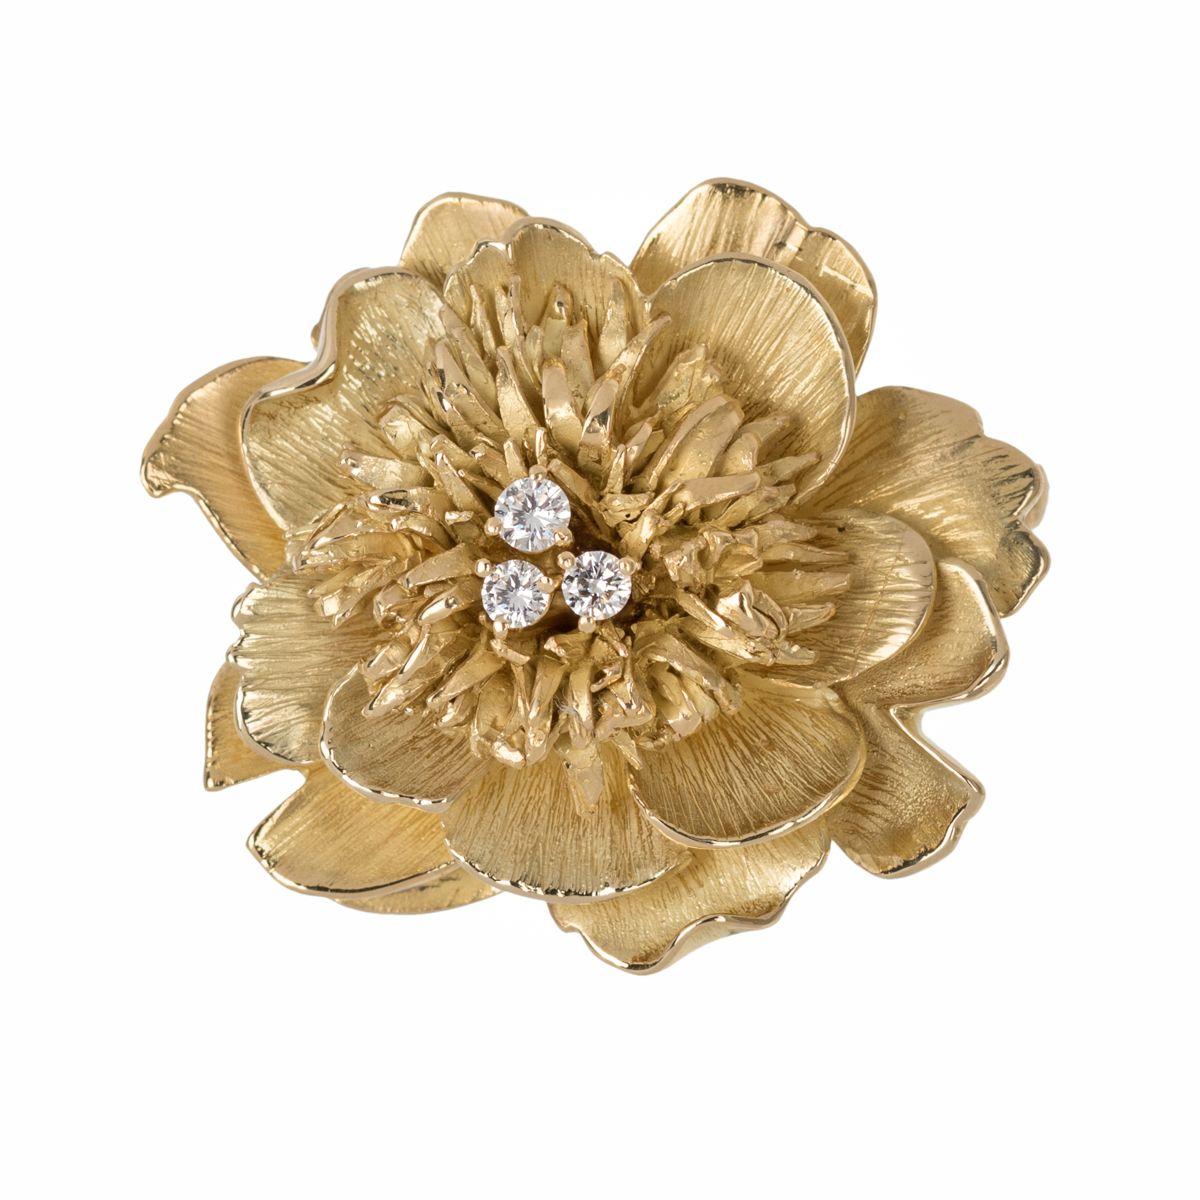 Taken from the Nature inspired collection, this finely hand-crafted 18k yellow gold Peony flower brooch features multiple layers of golden petals for an authentic flower look and feel. In the centre of the flower are three masterfully set sparkling